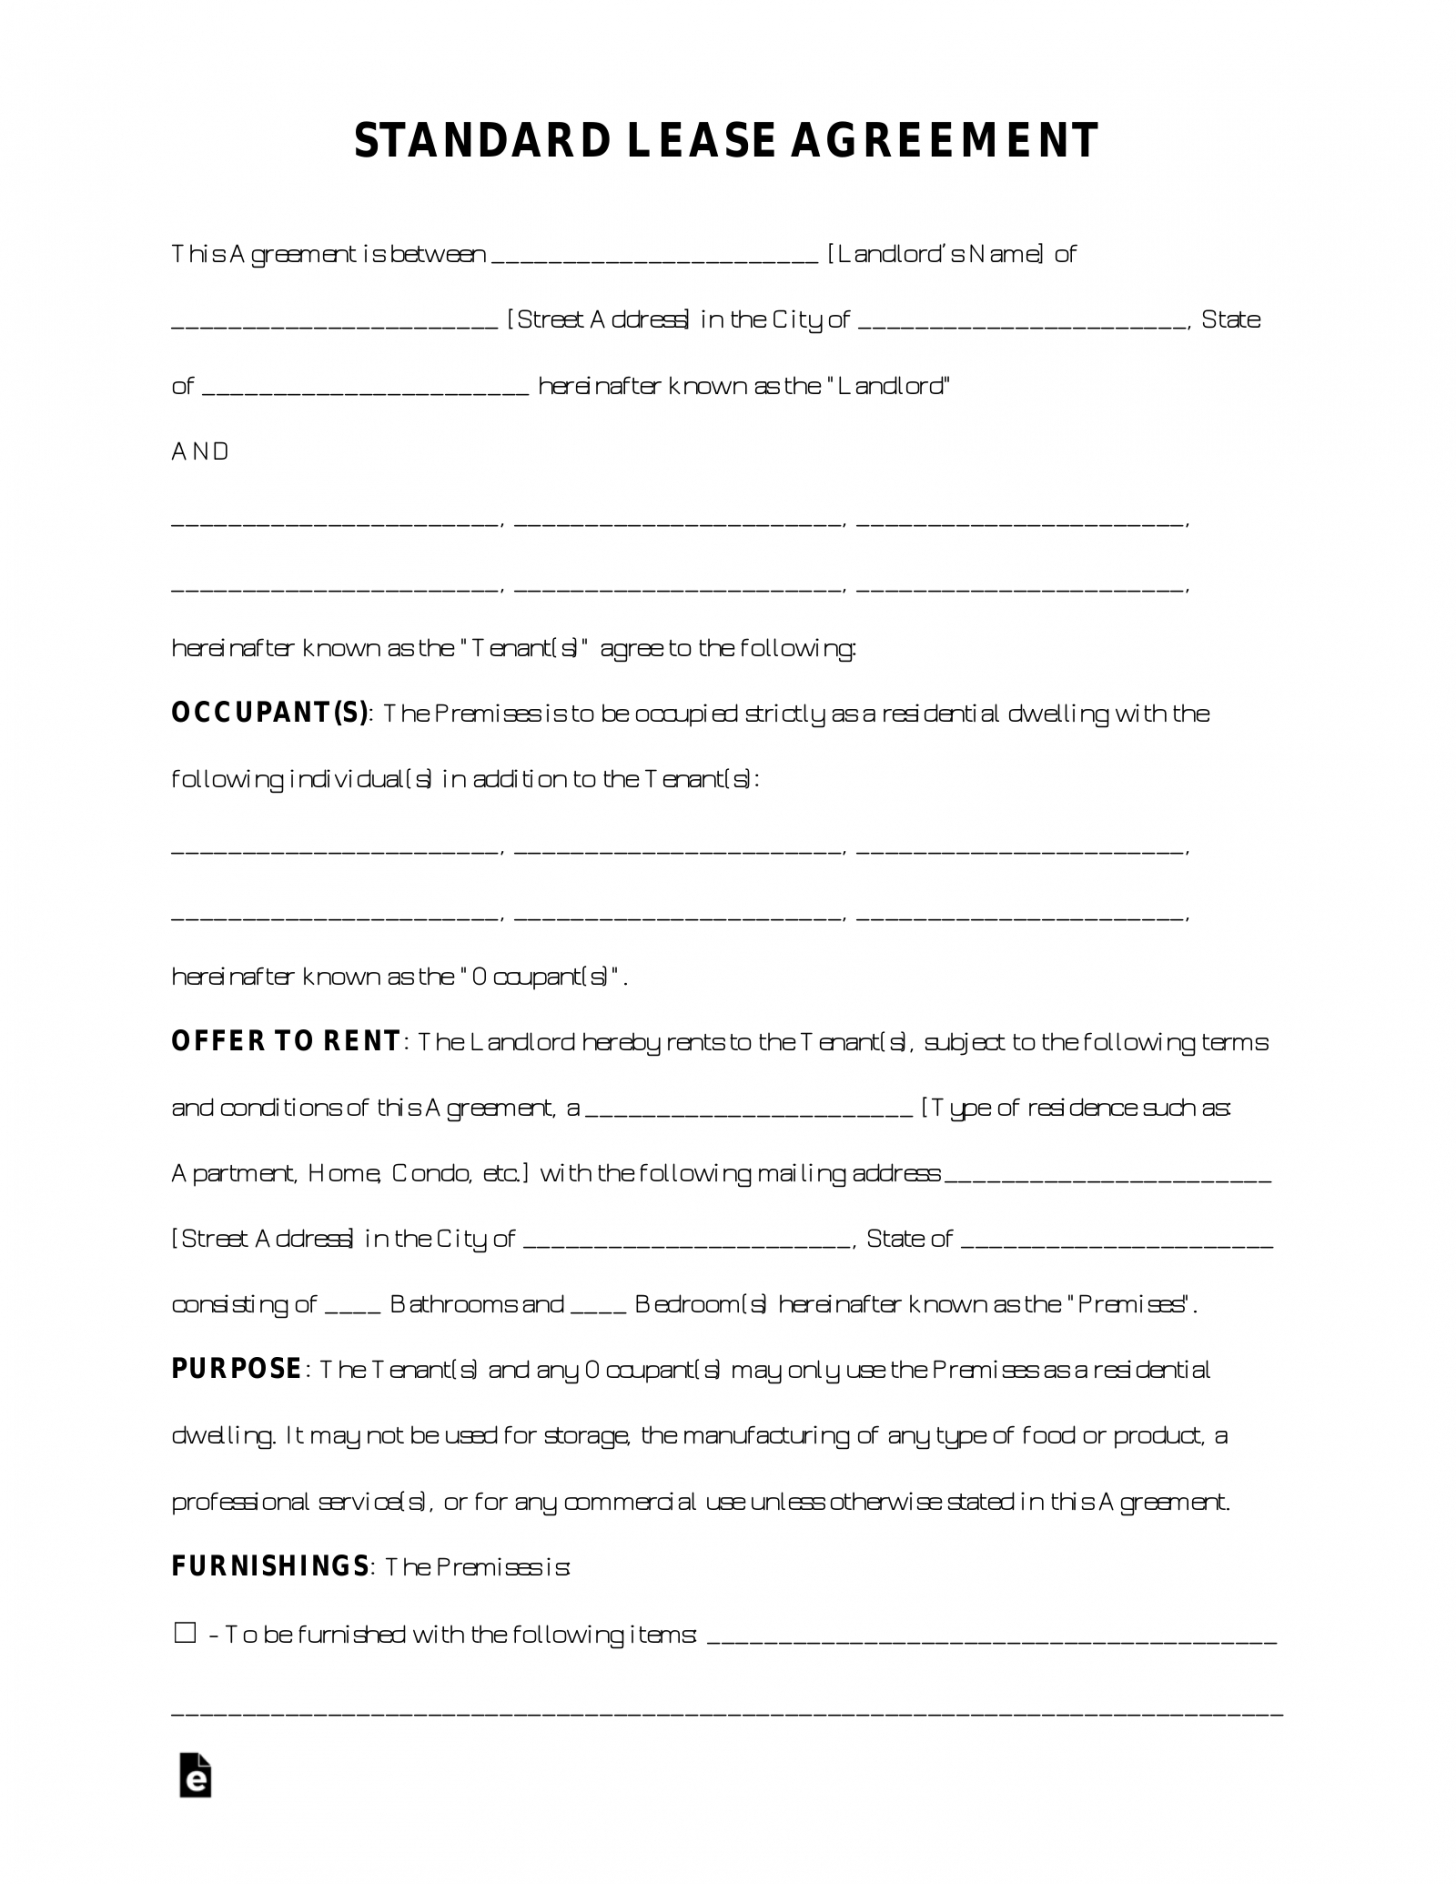 Editable Free Standard Residential Lease Agreement Template Pdf 